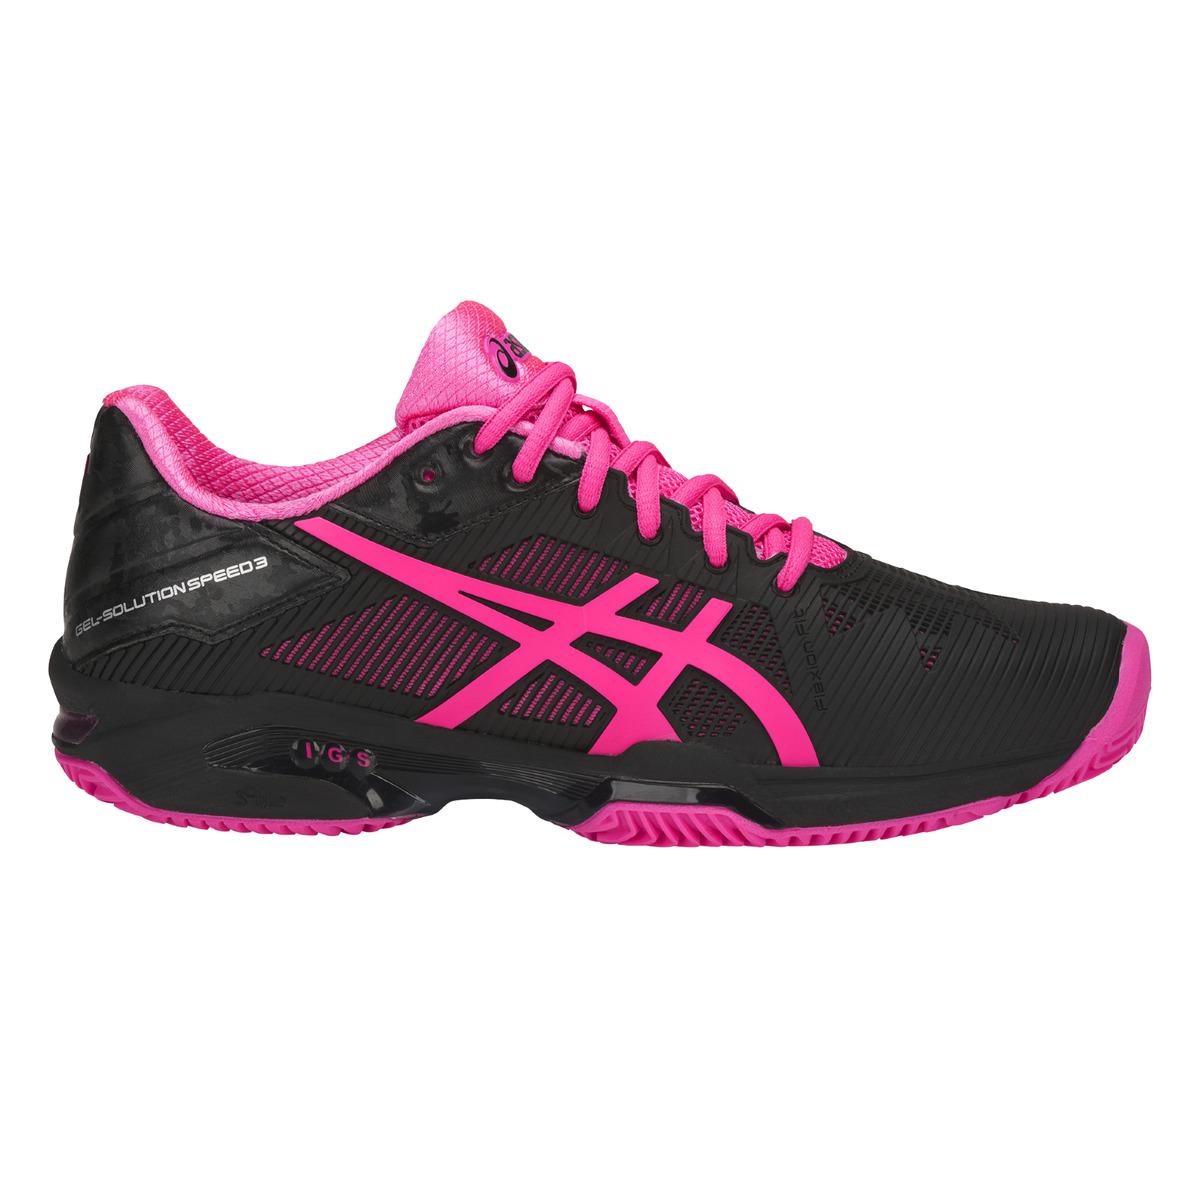 Asics Gel-solution Speed 3 Clay Tennis/paddle Tennis Shoes in Pink | Lyst